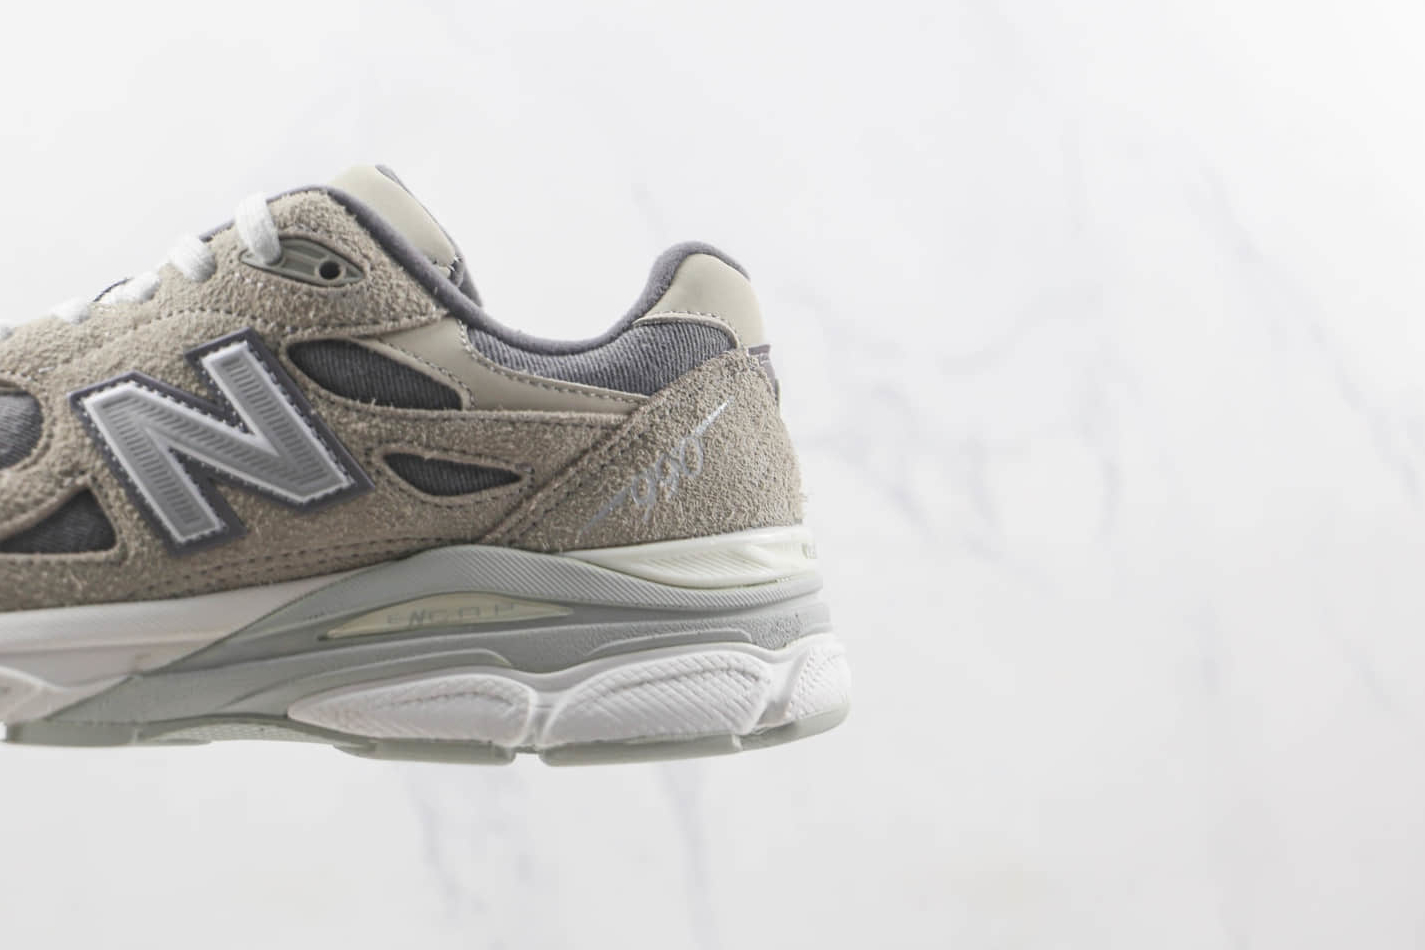 New Balance Levi's x 990v3 Made In USA 'Elephant Skin' M990LV3 – Exclusive Collection